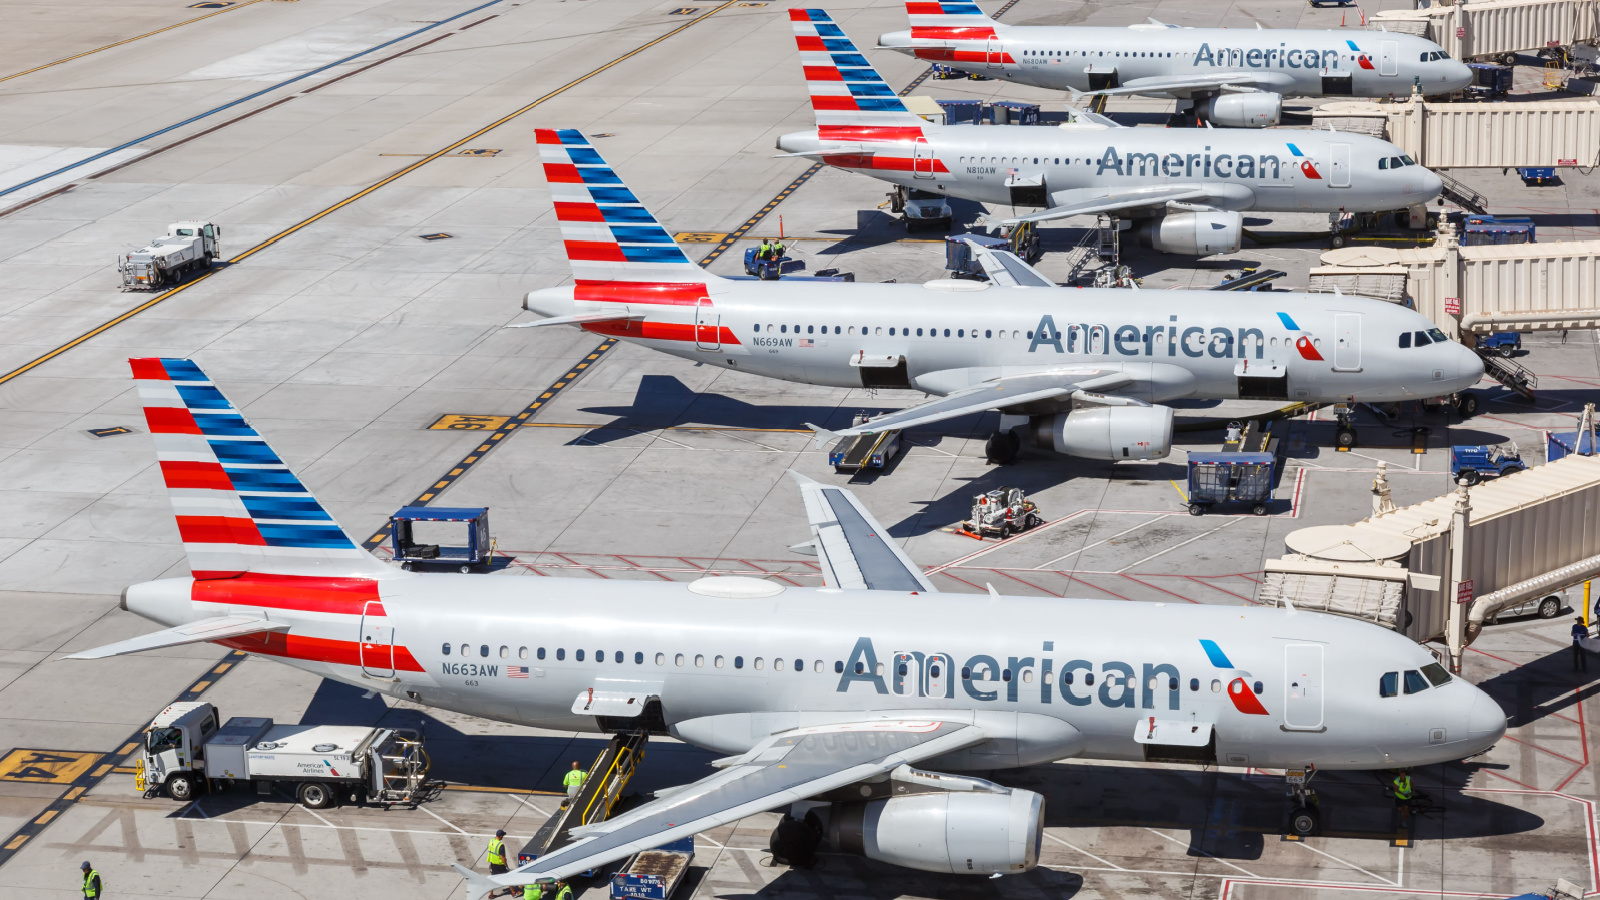 image credit: Markus Mainka/Shutterstock <p>A 9-year-old girl was expected to notice a hidden camera under a toilet seat, according to American Airlines’ defense. The airline’s lawyers made this claim in court filings, sparking outrage.</p>